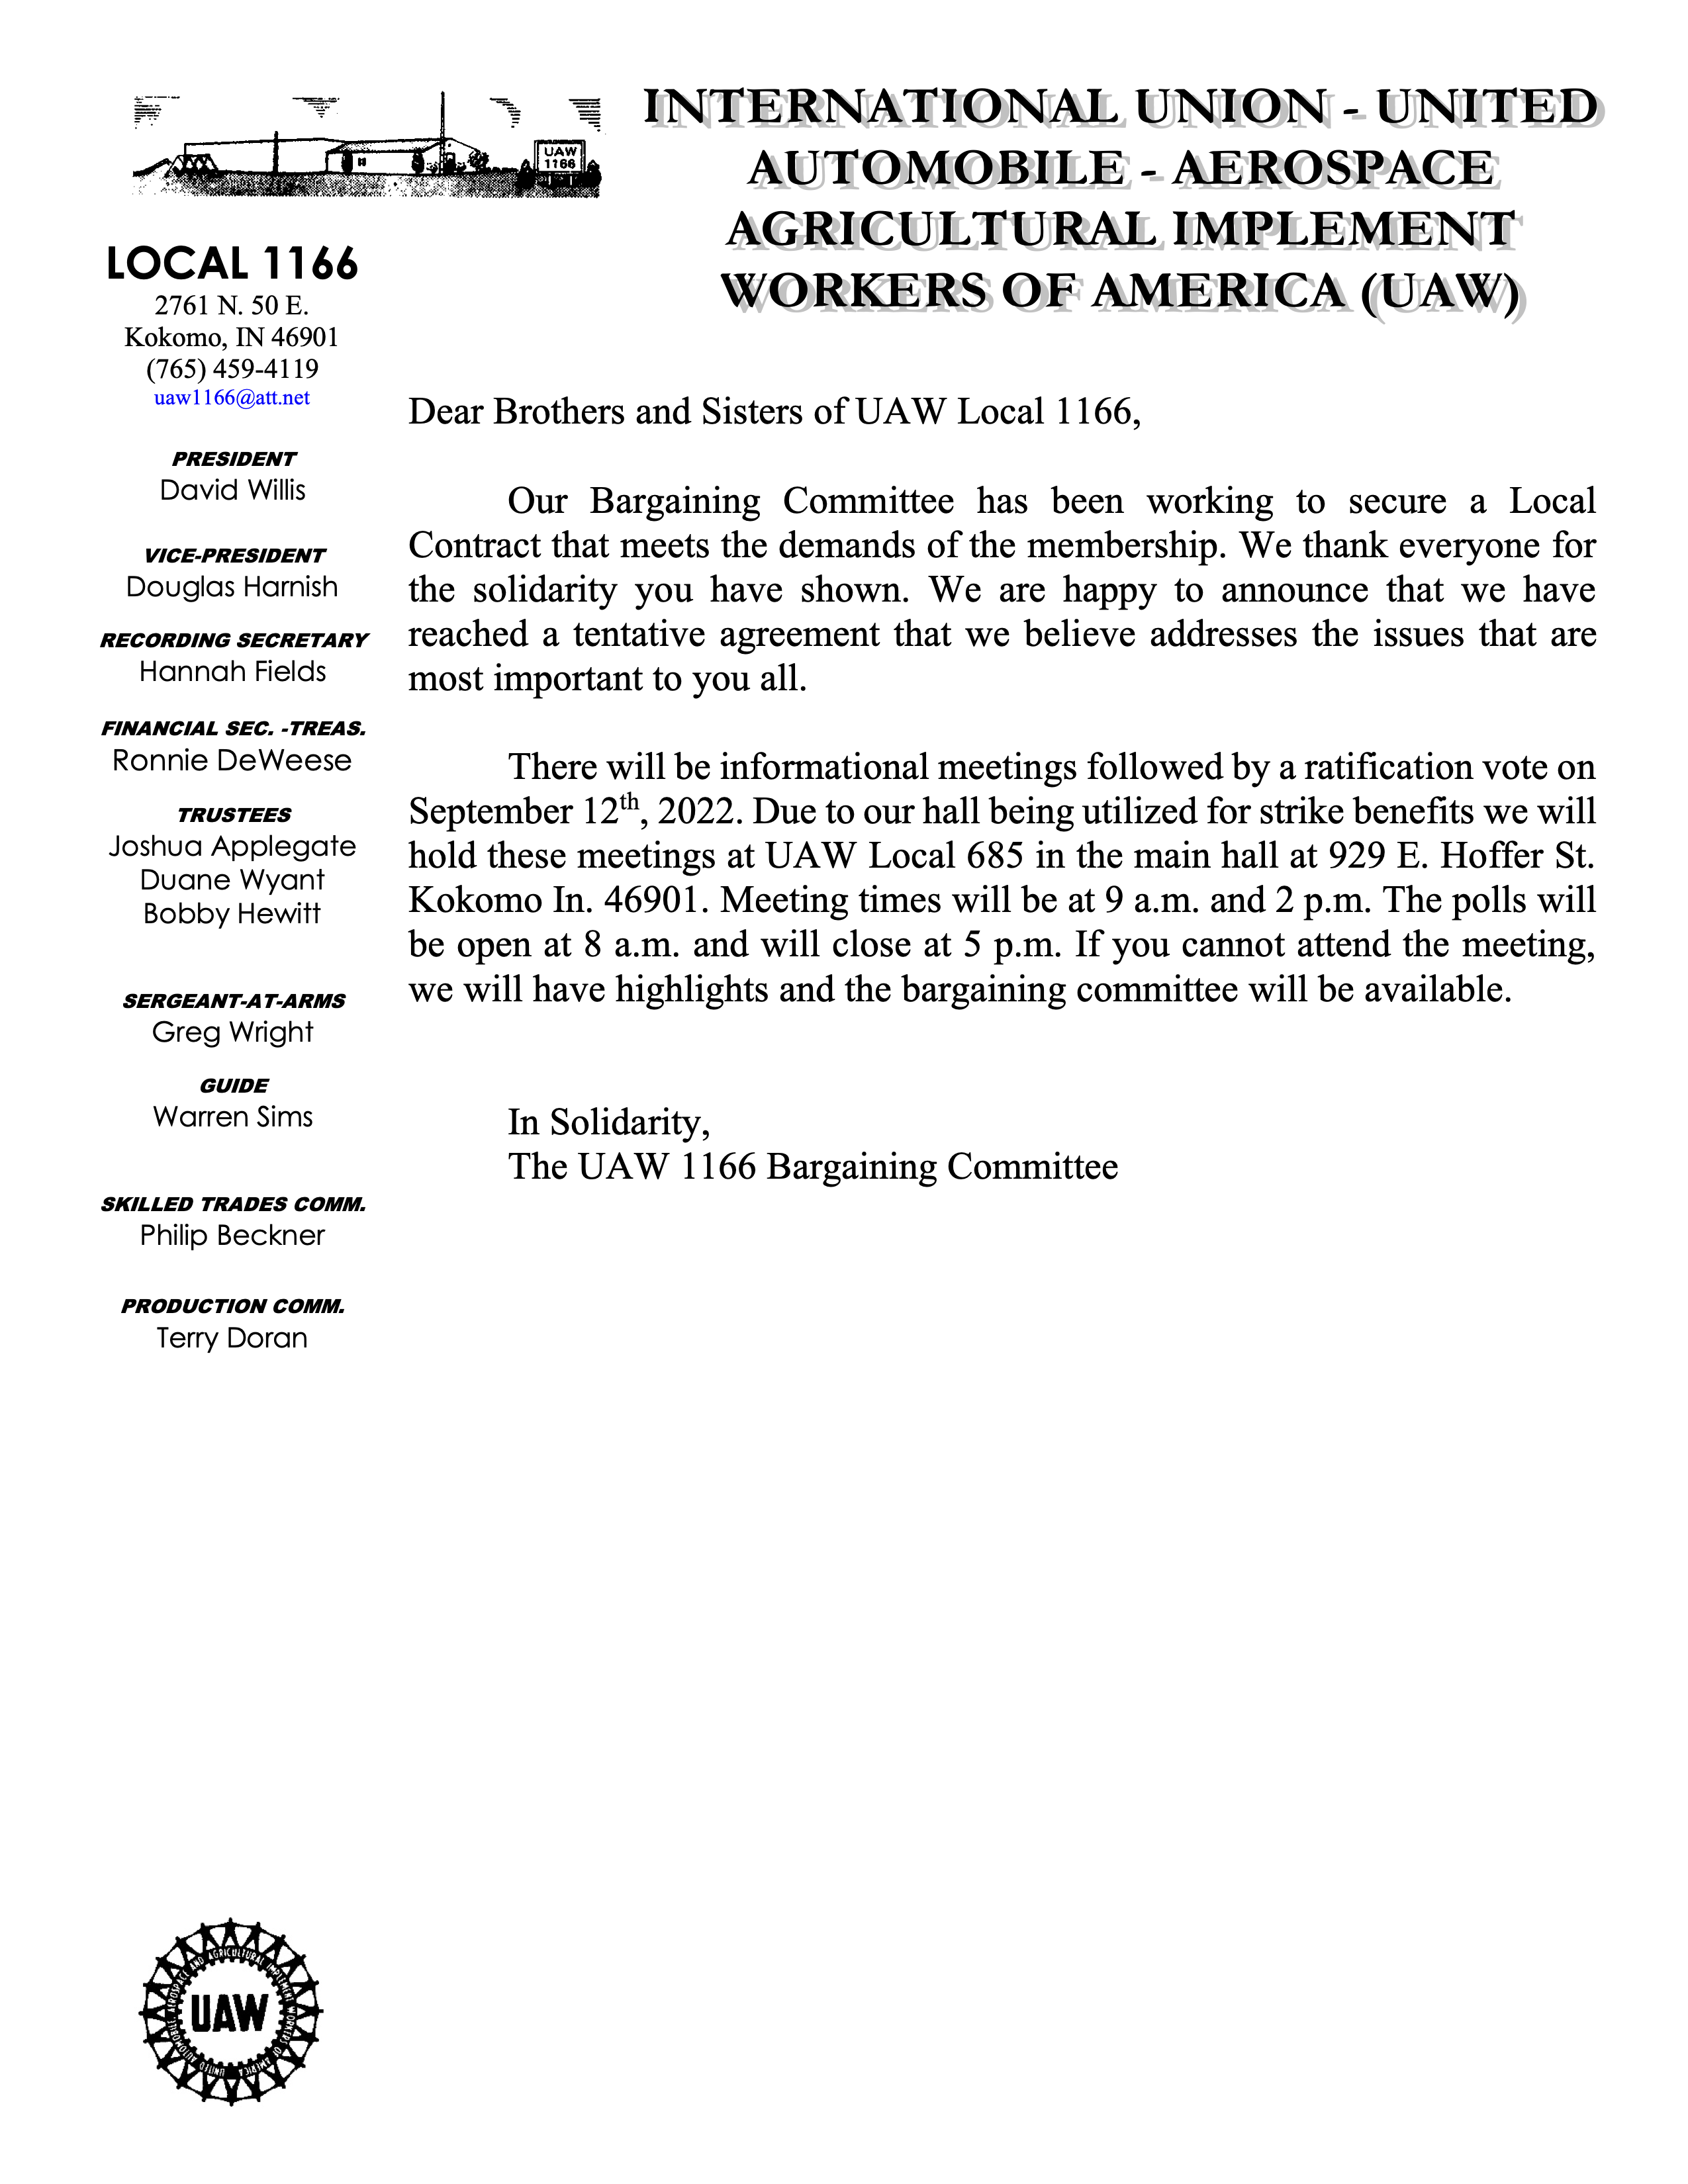 UAW Local 1166 local tentative agreement with KCP